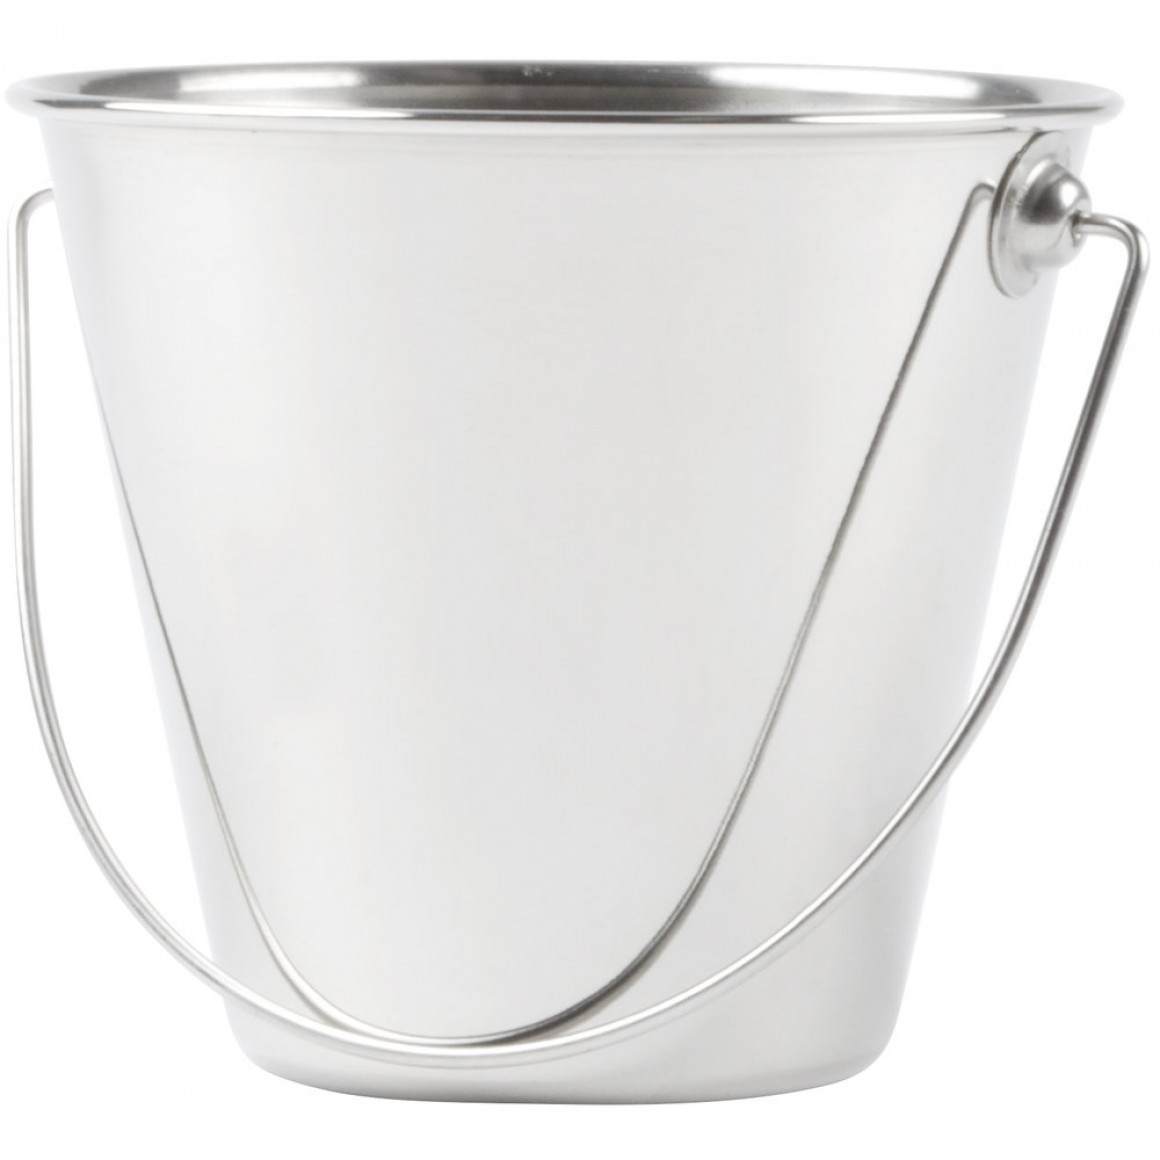 STAINLESS STEEL PAIL, 12 OZ.